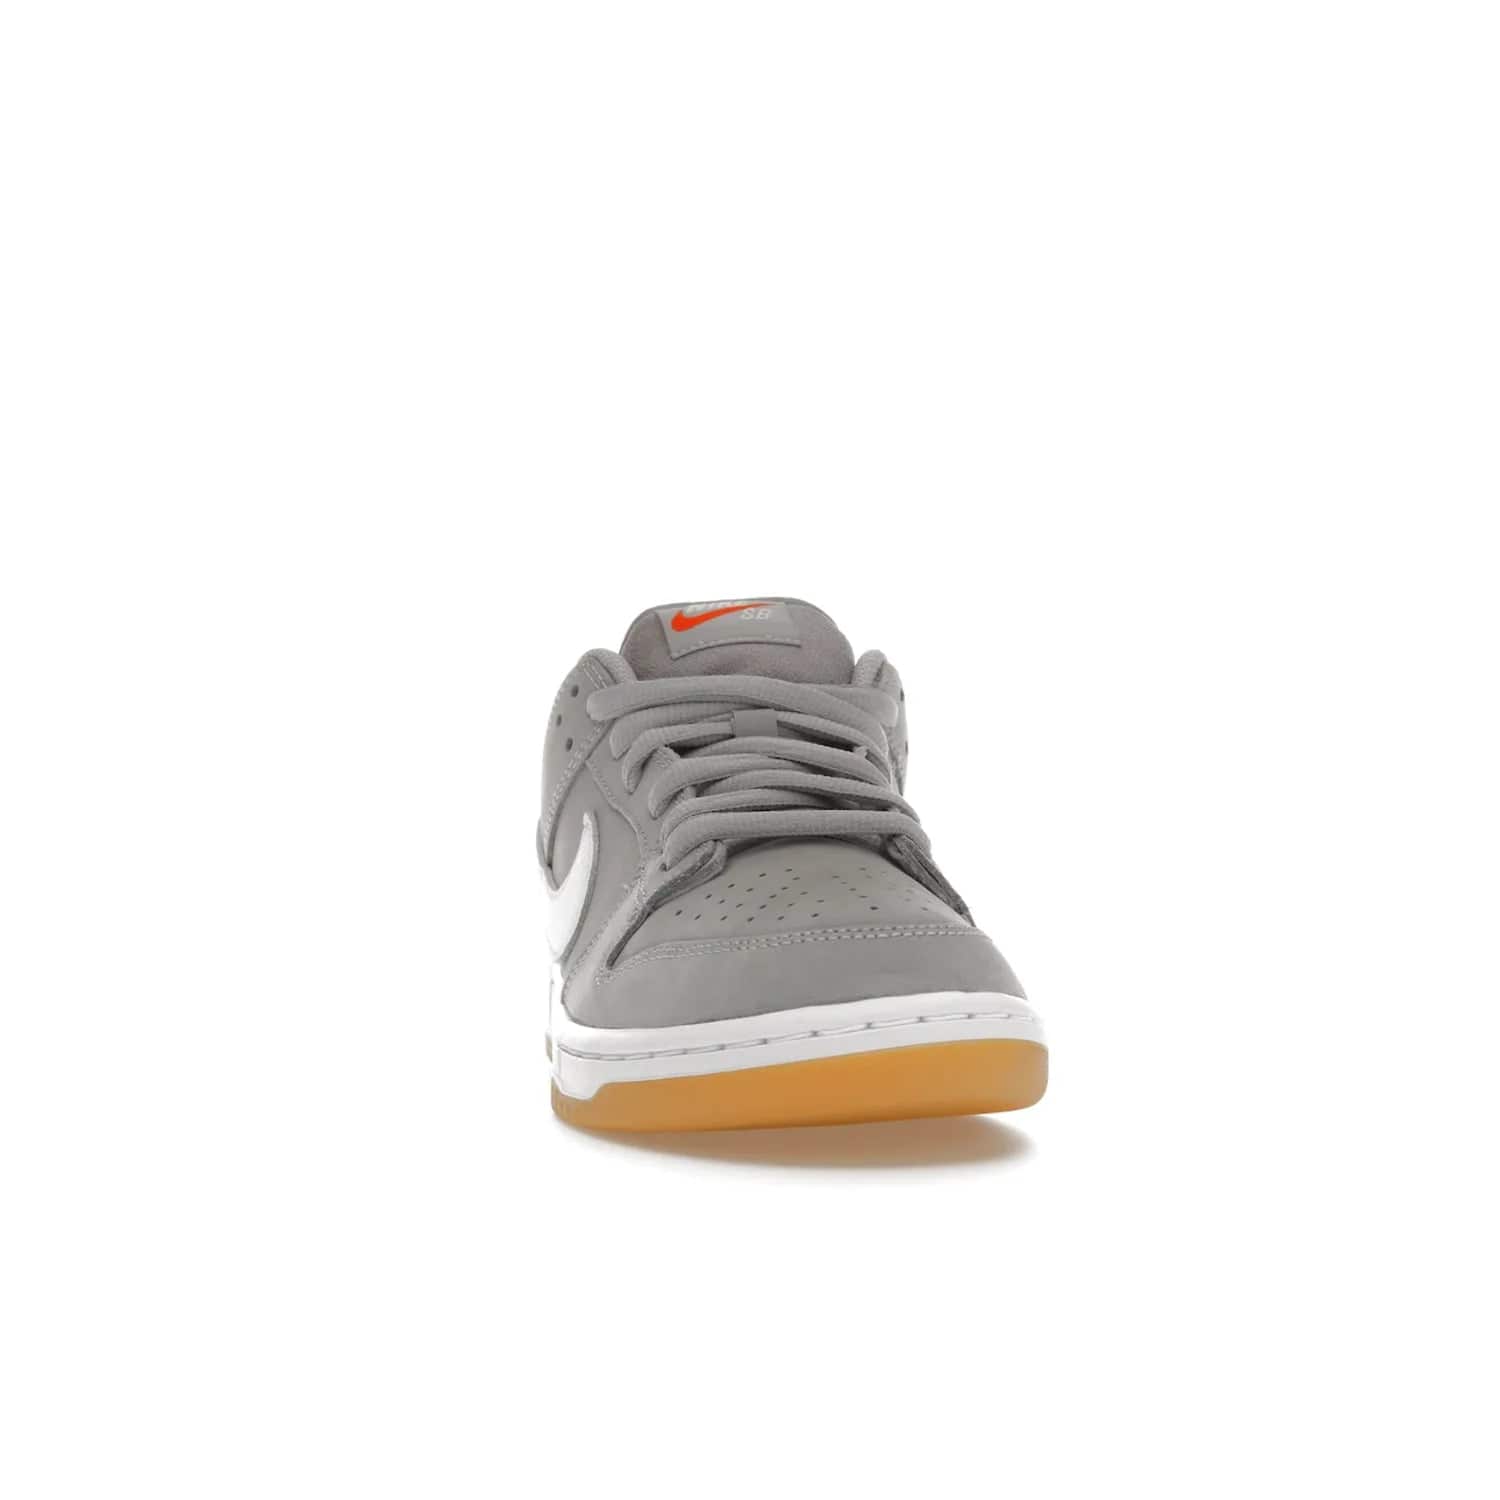 Nike SB Dunk Low Pro ISO Orange Label Wolf Grey Gum - Image 9 - Only at www.BallersClubKickz.com - Introducing Nike's SB Dunk Low Pro ISO Orange Label Wolf Grey Gum - a stylish shoe with a premium Wolf Grey upper, white leather Nike Swoosh, and an eye-catching gum outsole. With special Nike branding and packaging, this shoe adds a unique fashion statement. Out Feb. 24, 2023.